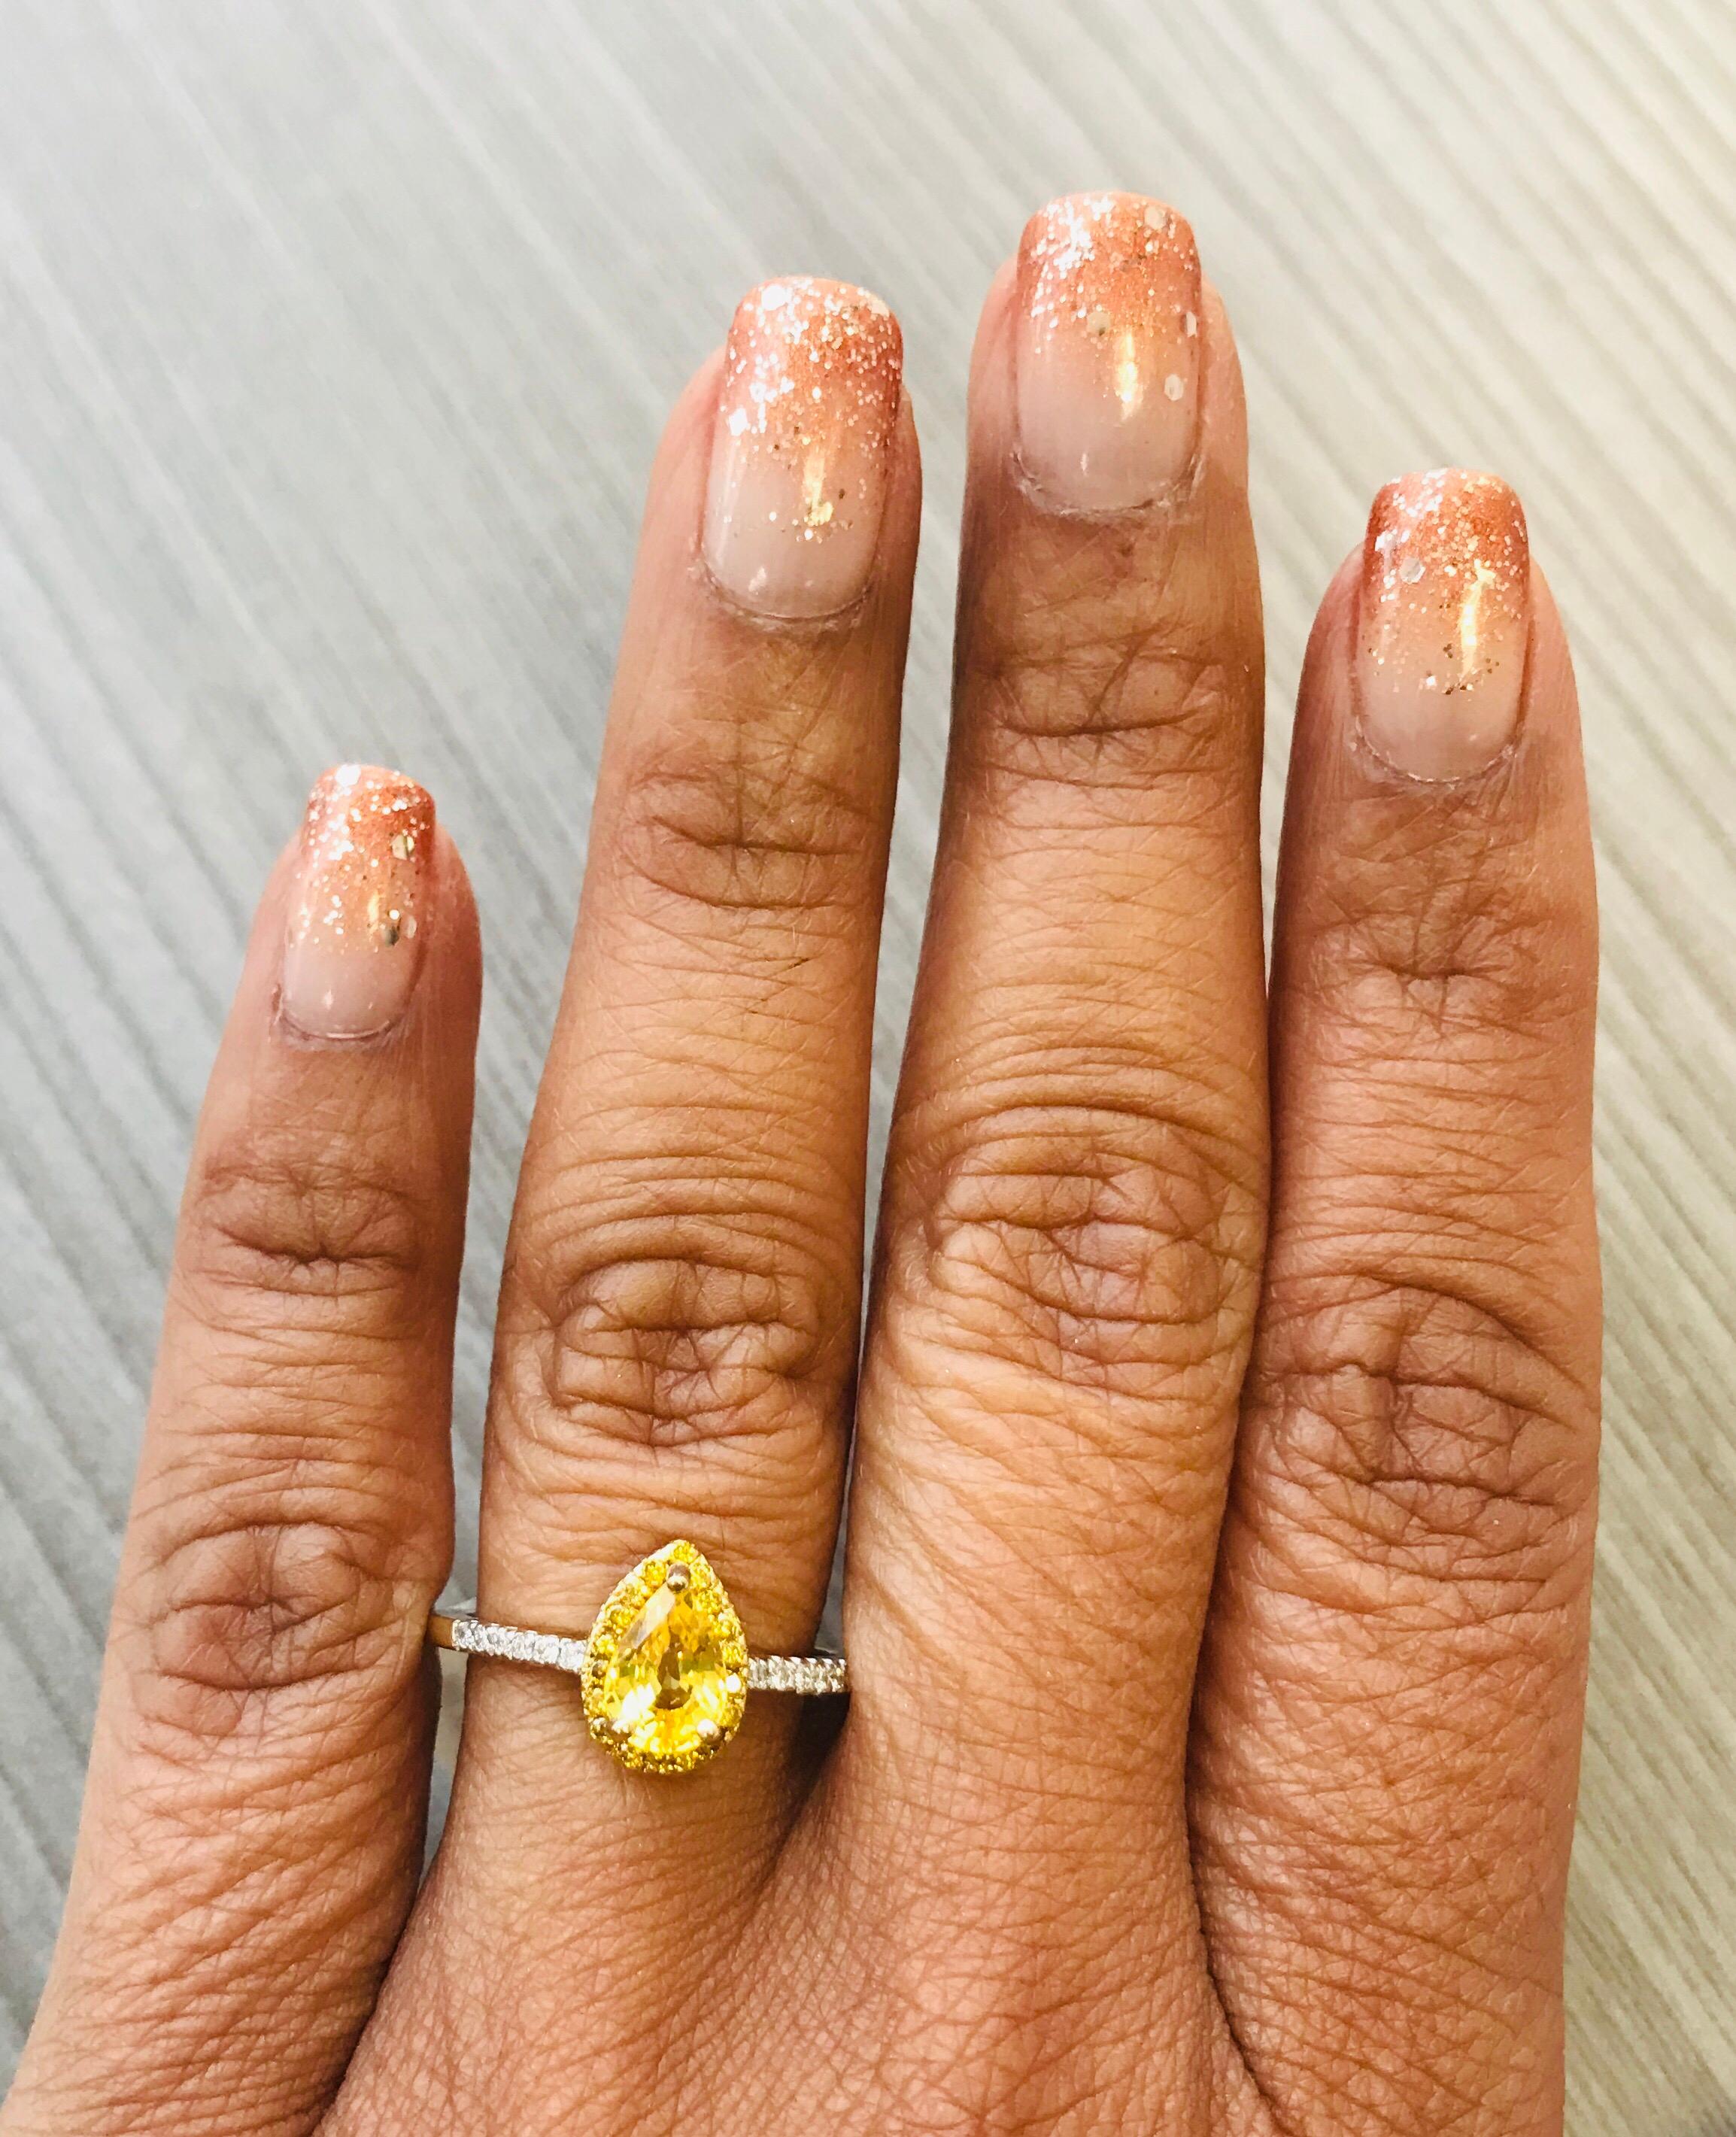 yellow gold engagement rings